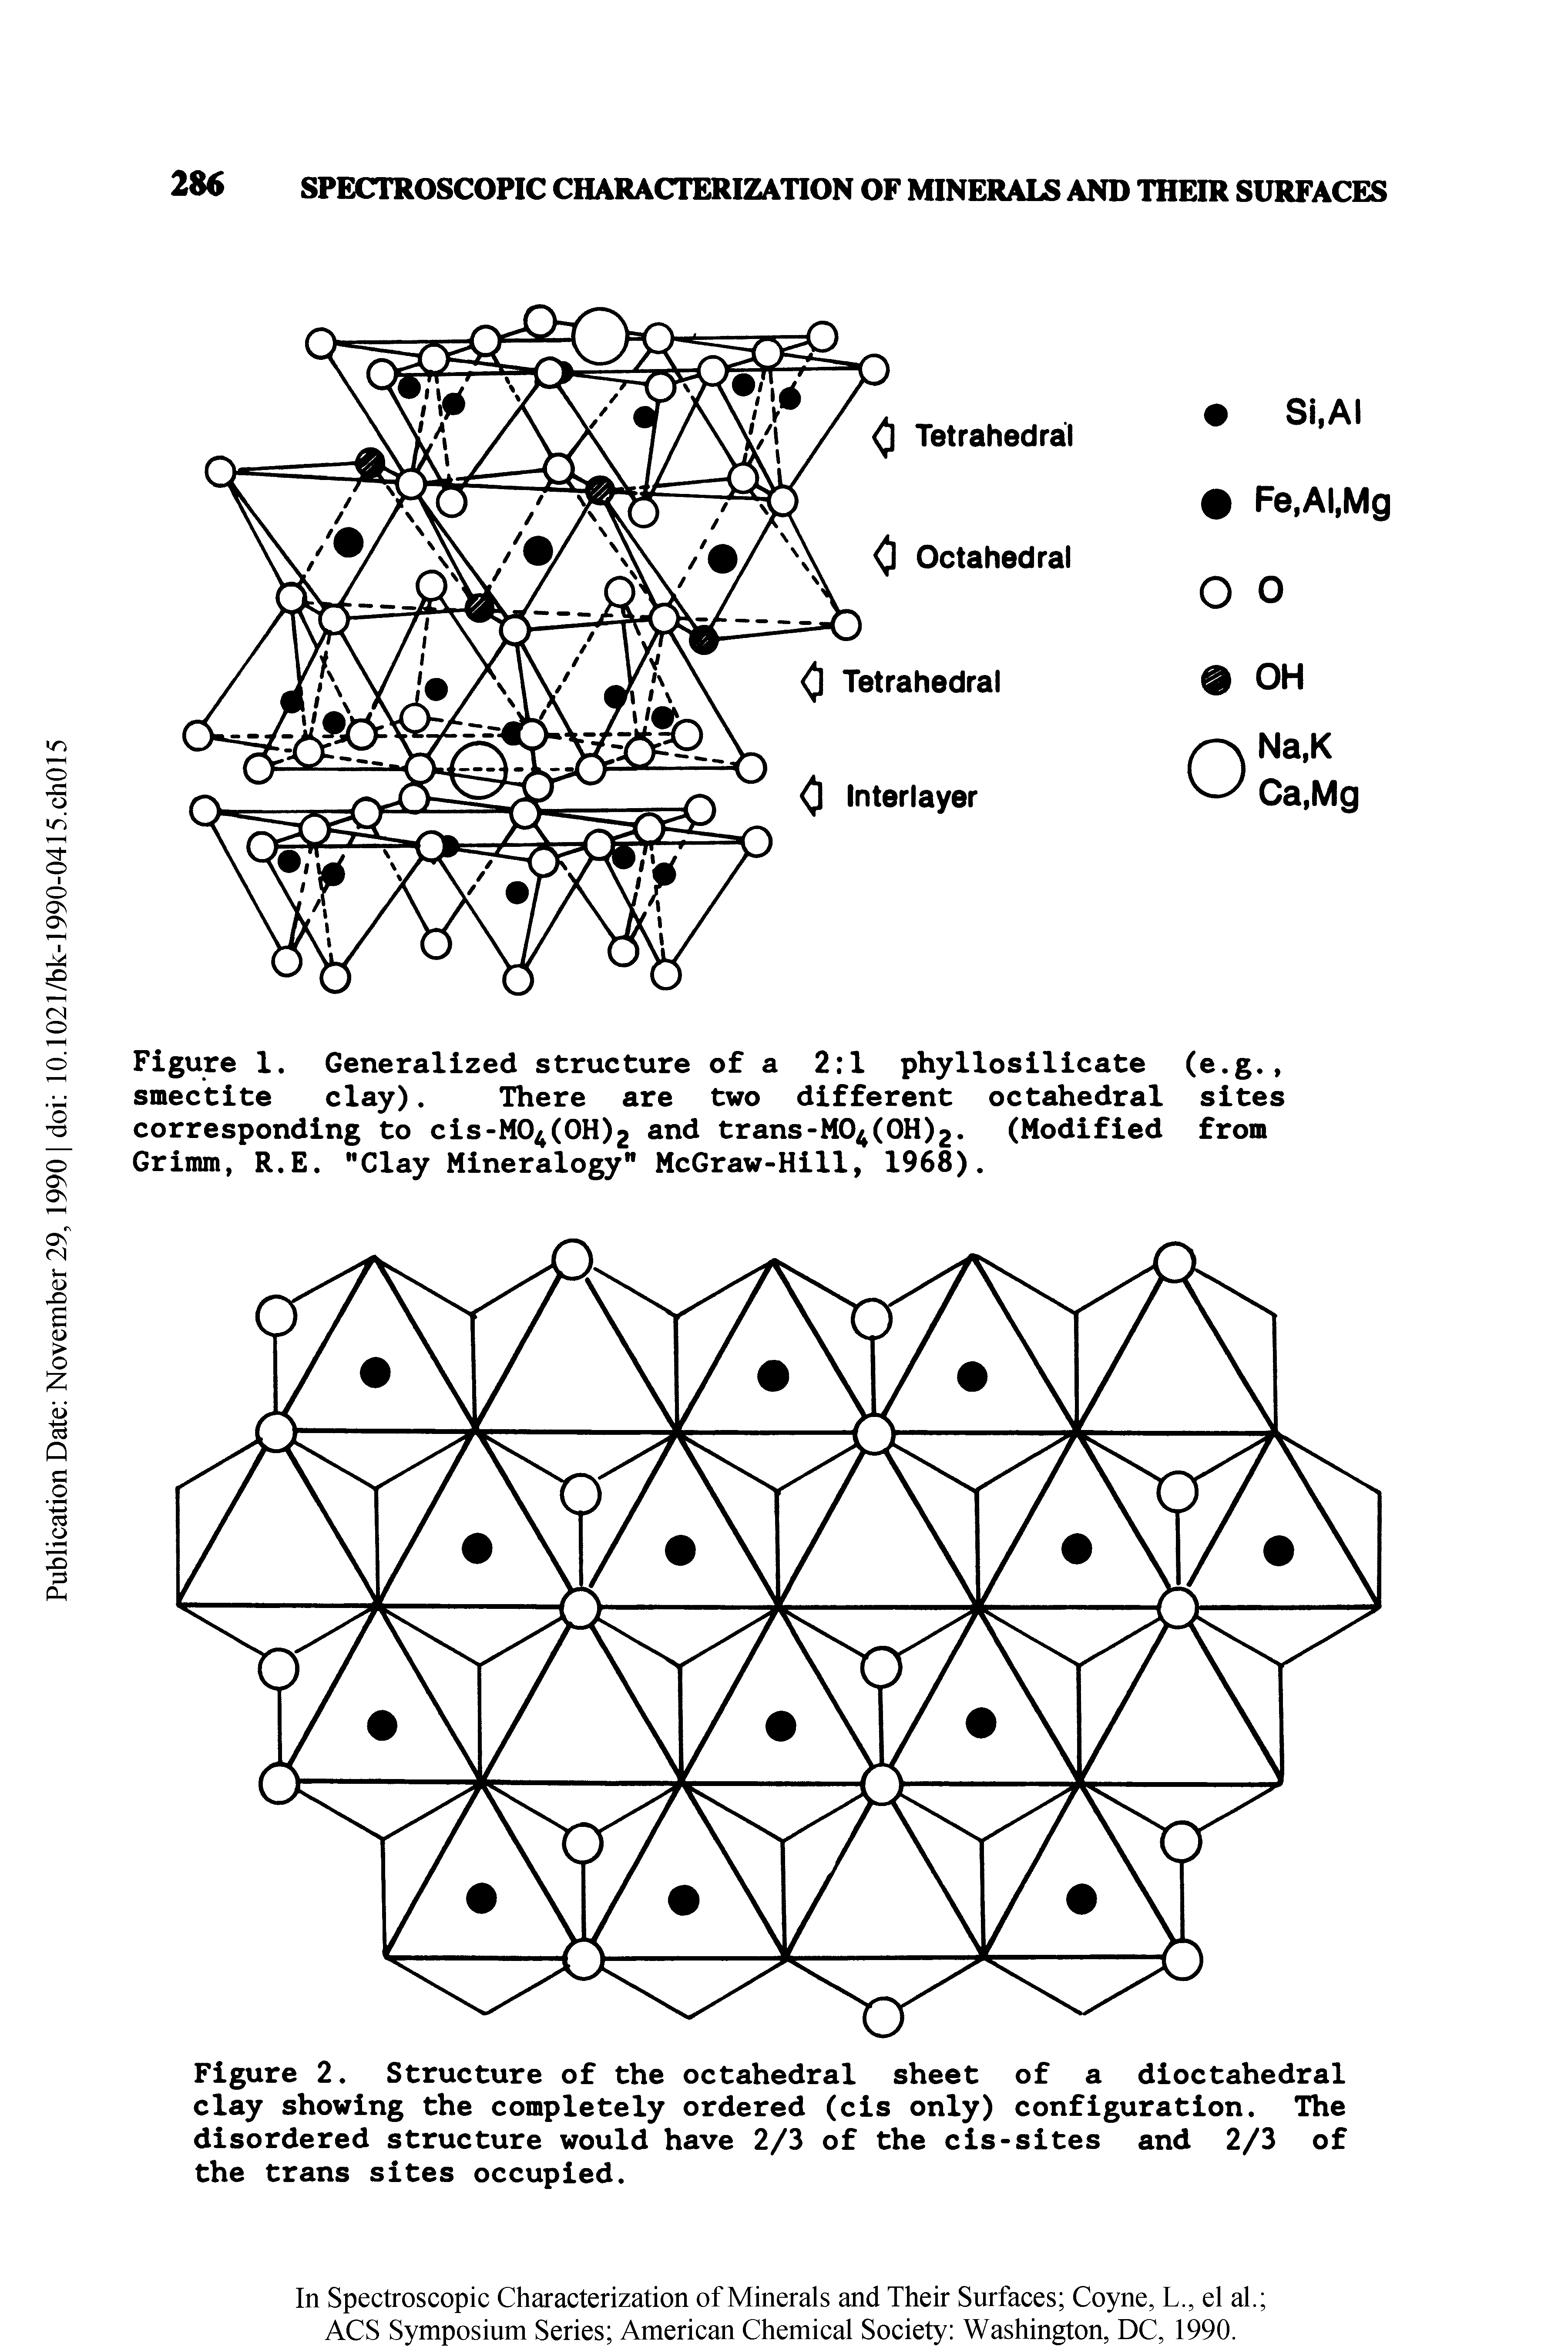 Figure 1. Generalized structure of a 2 1 phyllosilicate (e.g., smectite clay). There are two different octahedral sites corresponding to cis-M04(0H)2 and trans-MO OH. (Modified from Grimm, R.E. "Clay Mineralogy" McGraw-Hill, 1968).